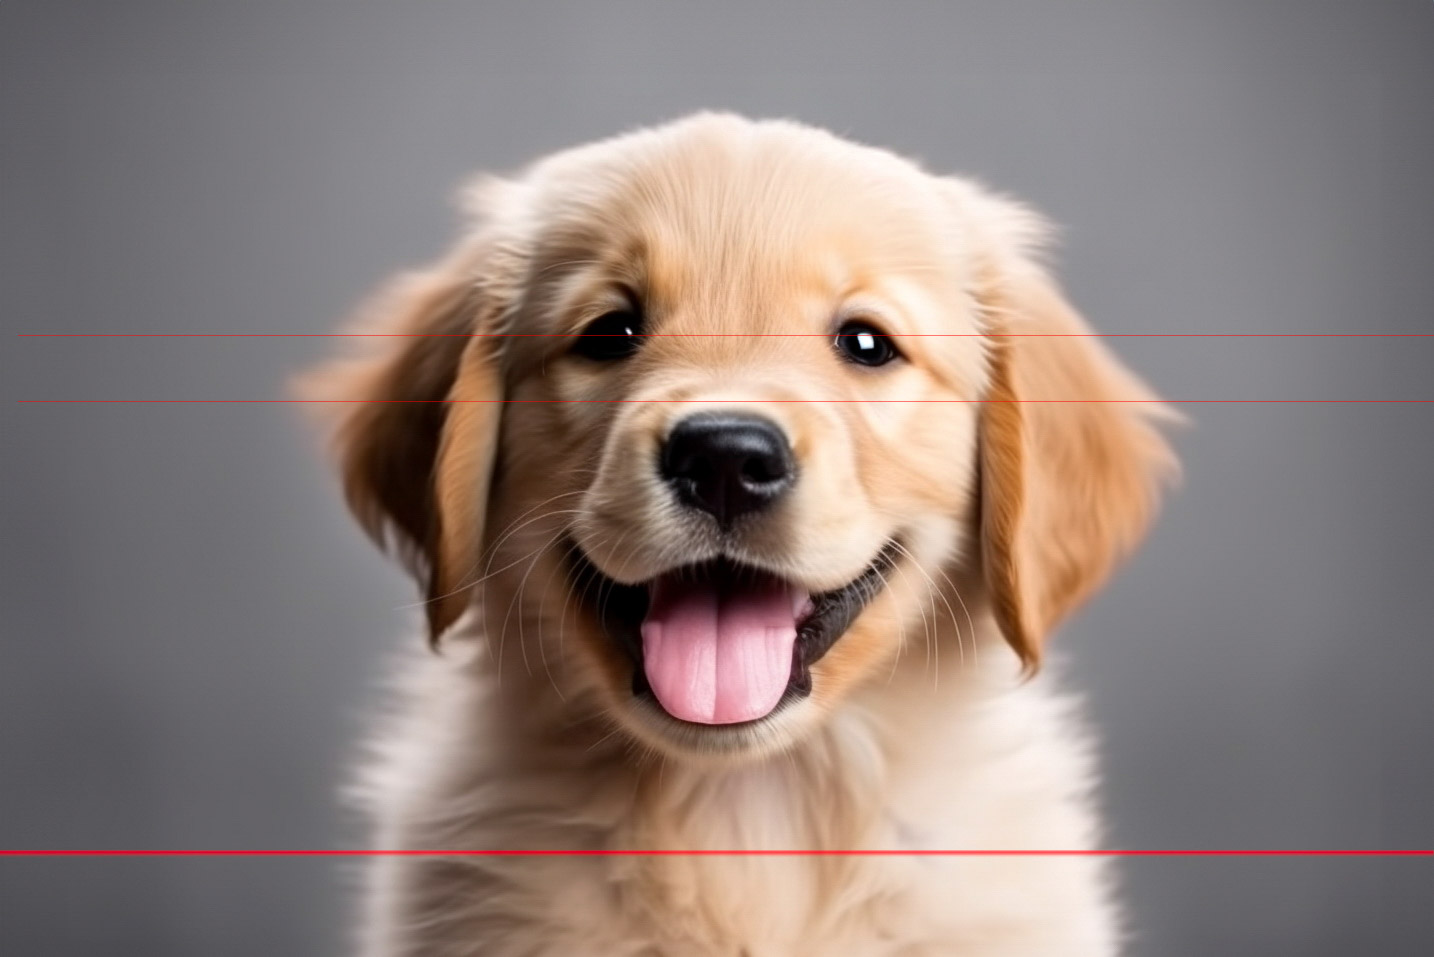 A close-up picture of a golden retriever puppy sitting against a gray background. The puppy has a happy expression with its tongue sticking out and ears perked up. Its fur is soft and fluffy, and its bright eyes convey an endearing and playful demeanor.